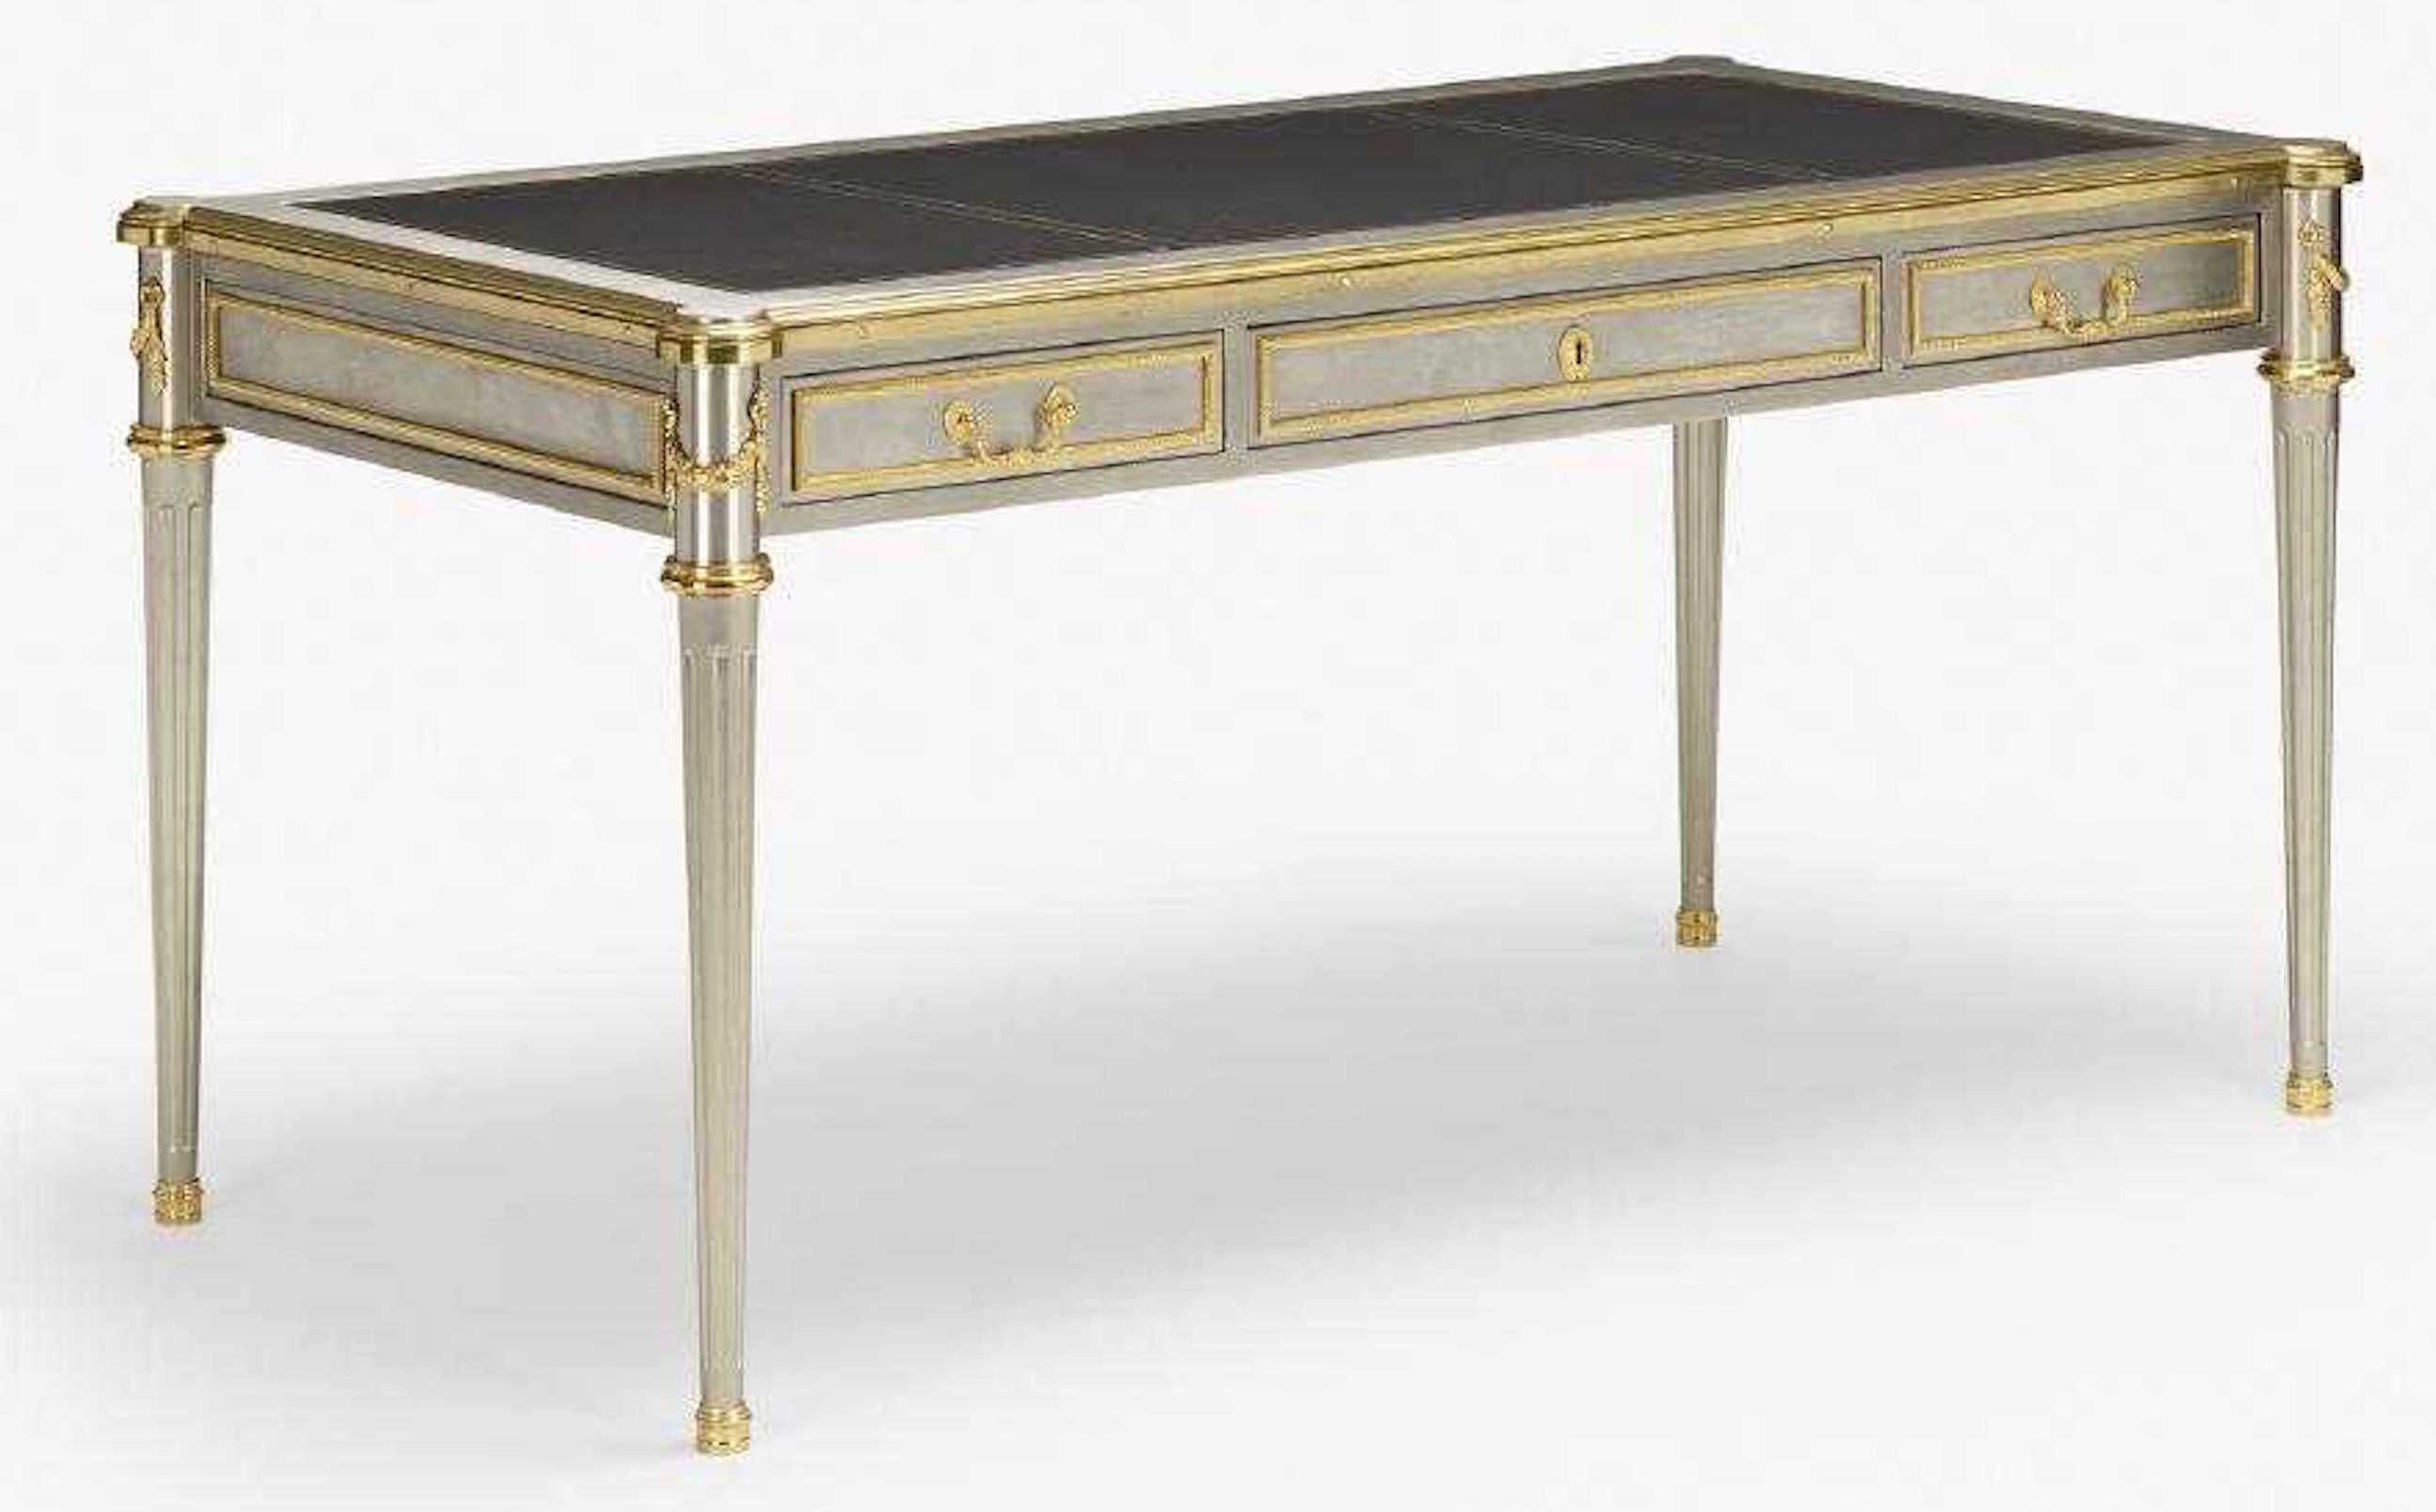 Bureau Plat by John Vesey (1924 – 1992)
Bureau Plat, stainless steel, brass, and leather writing desk in the neoclassical style with three frieze drawers to one side. The center drawer measures 24